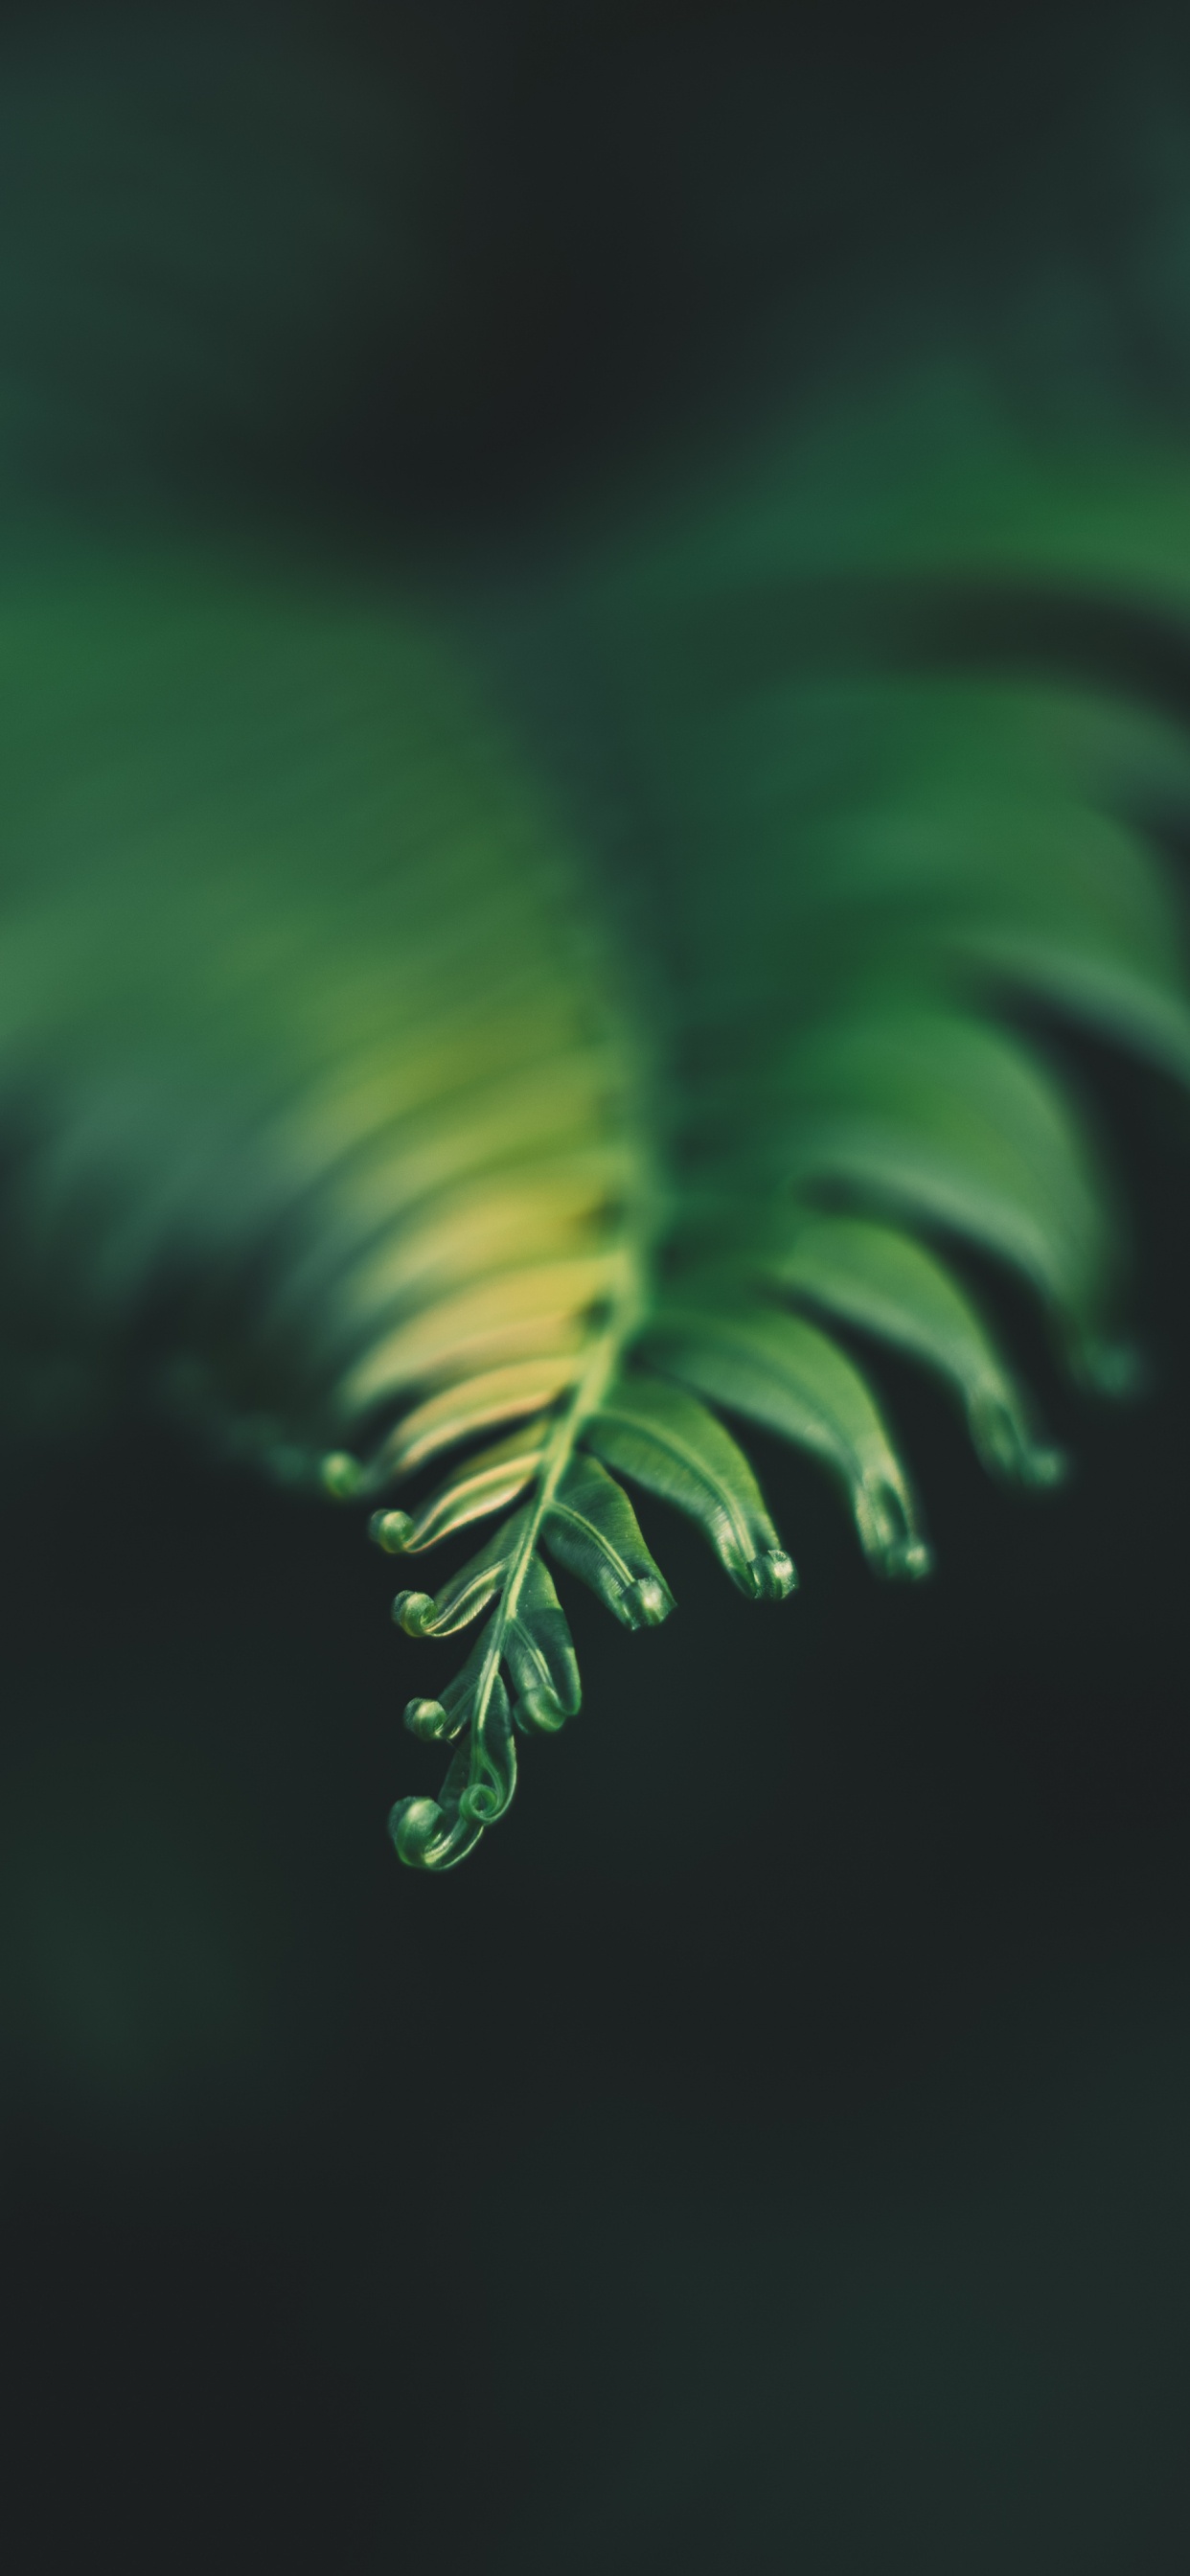 Plante, Feuille, Fougère, Green, Nature. Wallpaper in 1242x2688 Resolution